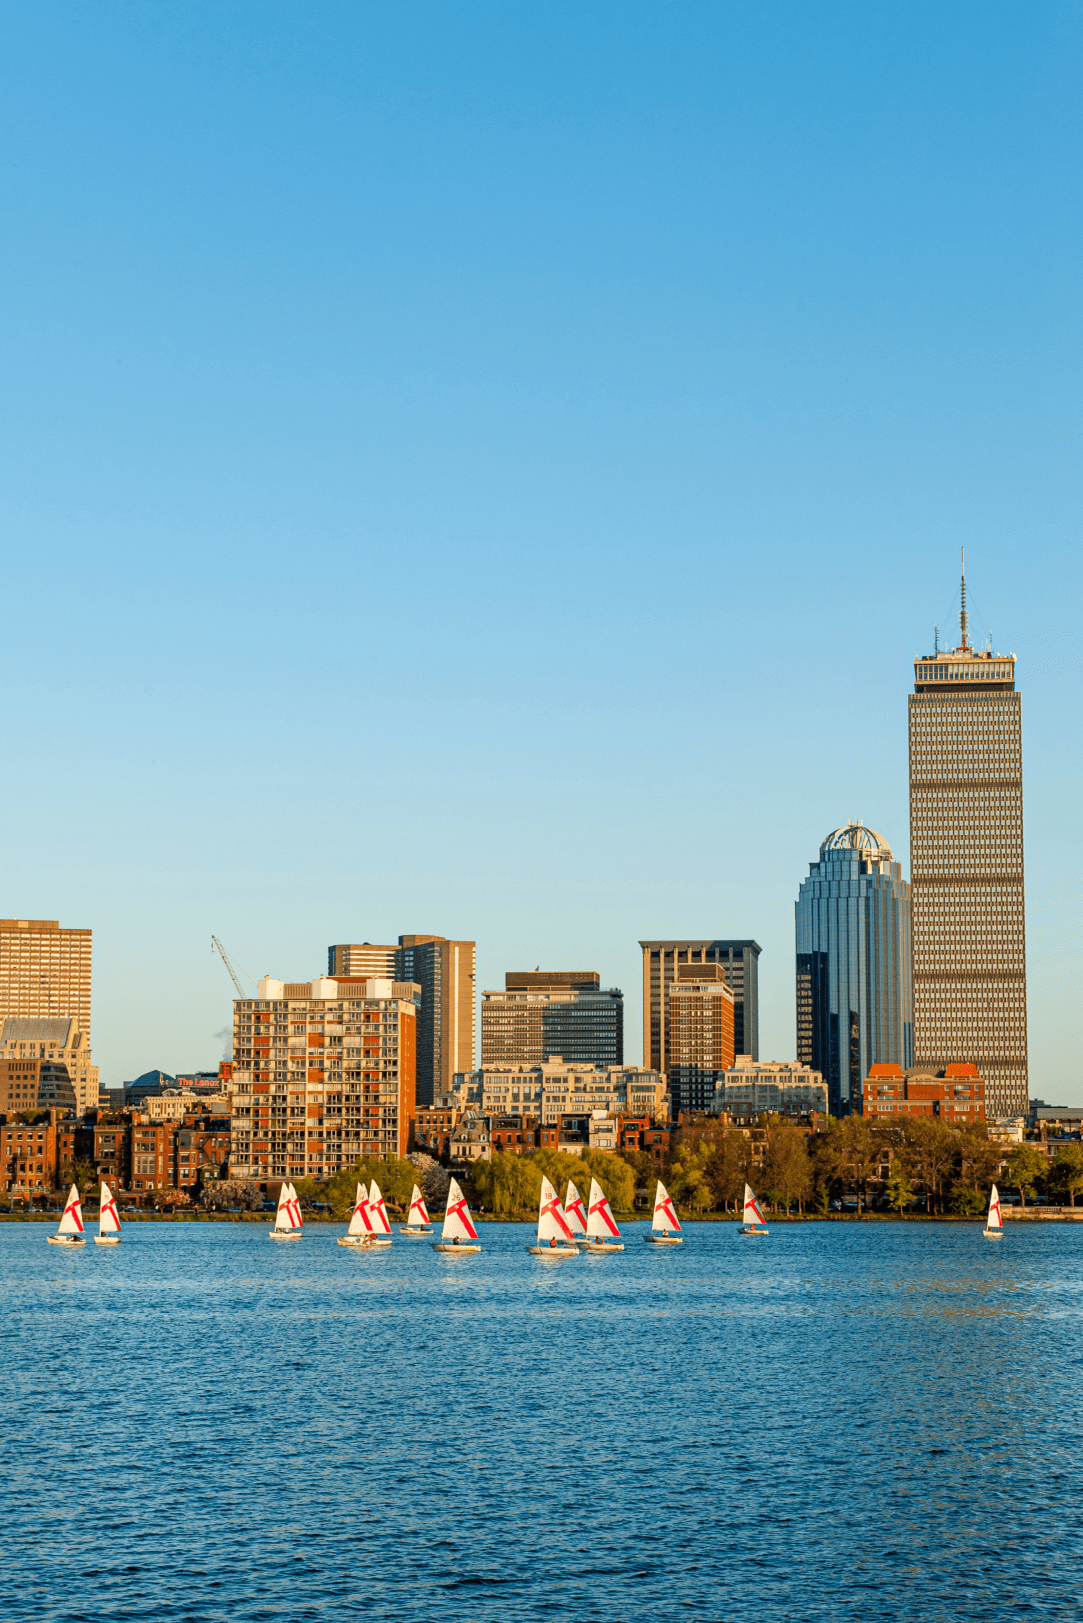 Boston scene with Prudential building and sail boats